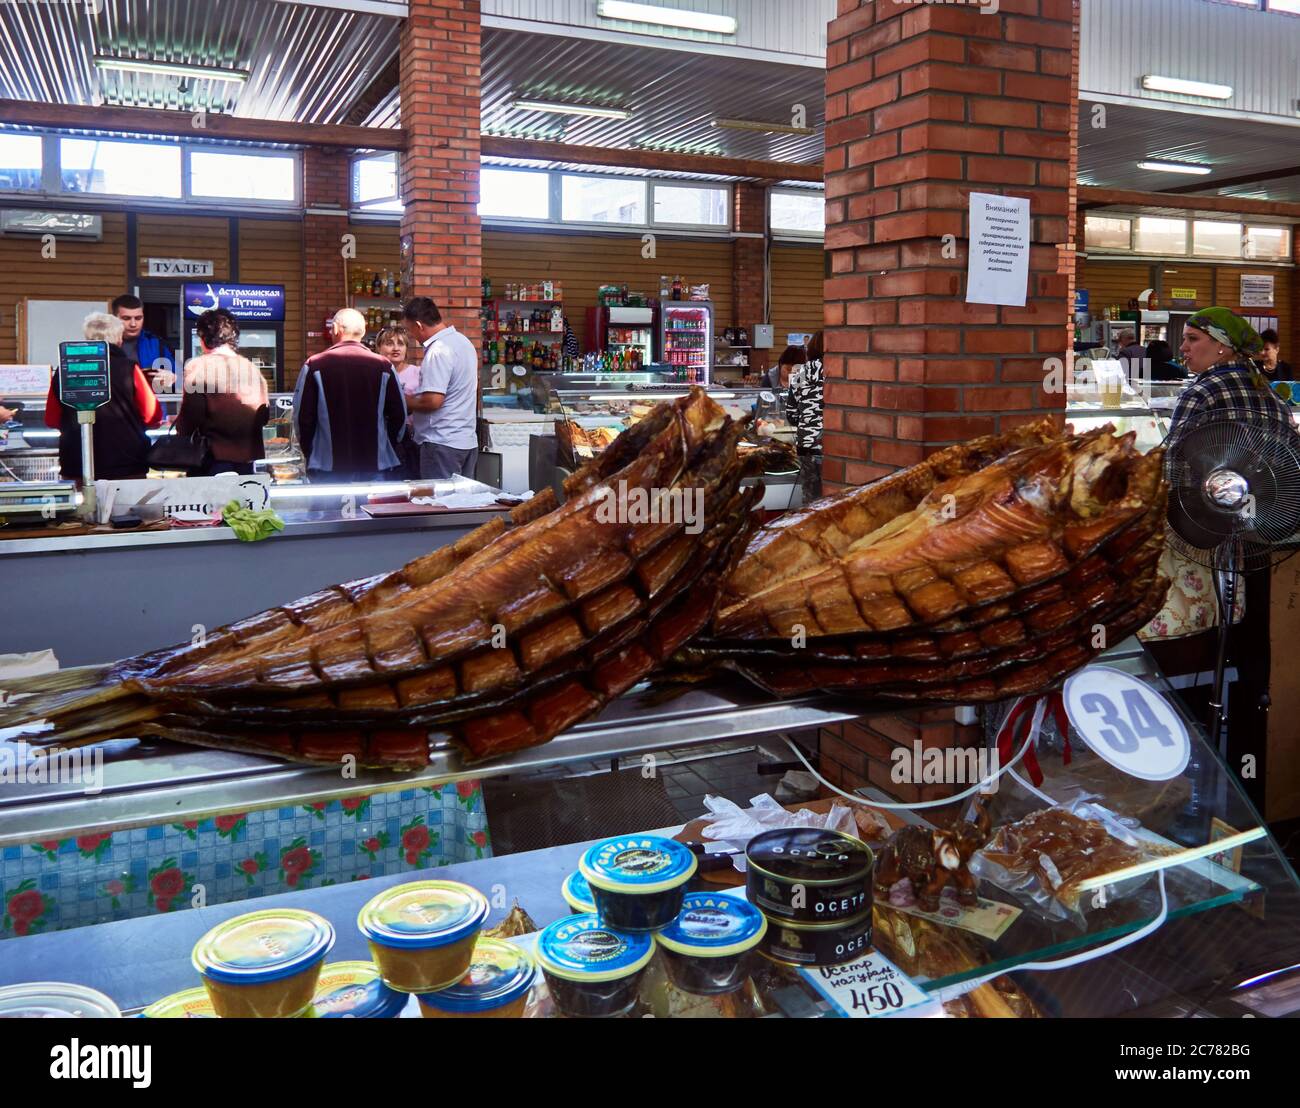 Russia, Astrakhan Oblast.  The city of Astrakhan has one of the largest fish market in the country. The sturgeons  are present in all the stalls. Astrakhan is the city of golden eggs, the famous sturgeon caviar. Stock Photo